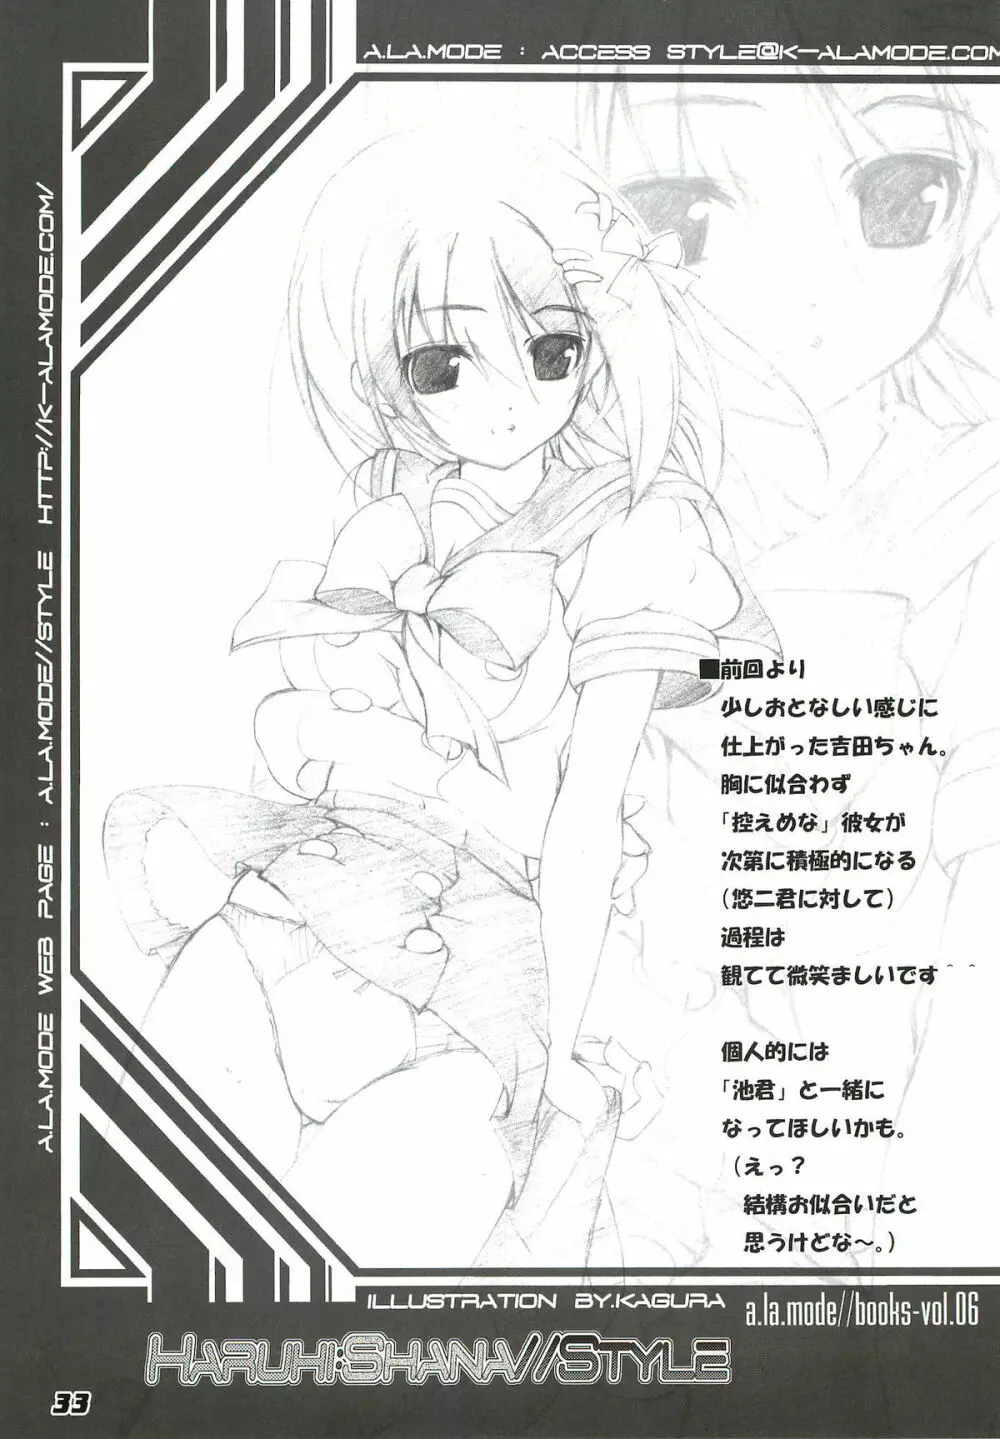 La Collection -Shana／／Style- Page.33